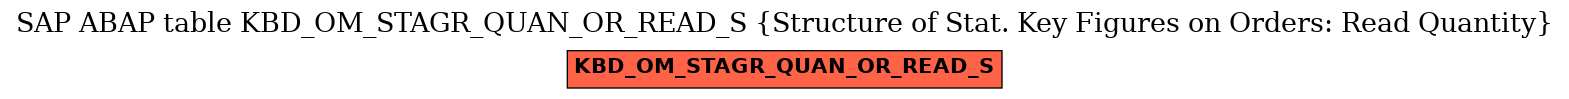 E-R Diagram for table KBD_OM_STAGR_QUAN_OR_READ_S (Structure of Stat. Key Figures on Orders: Read Quantity)